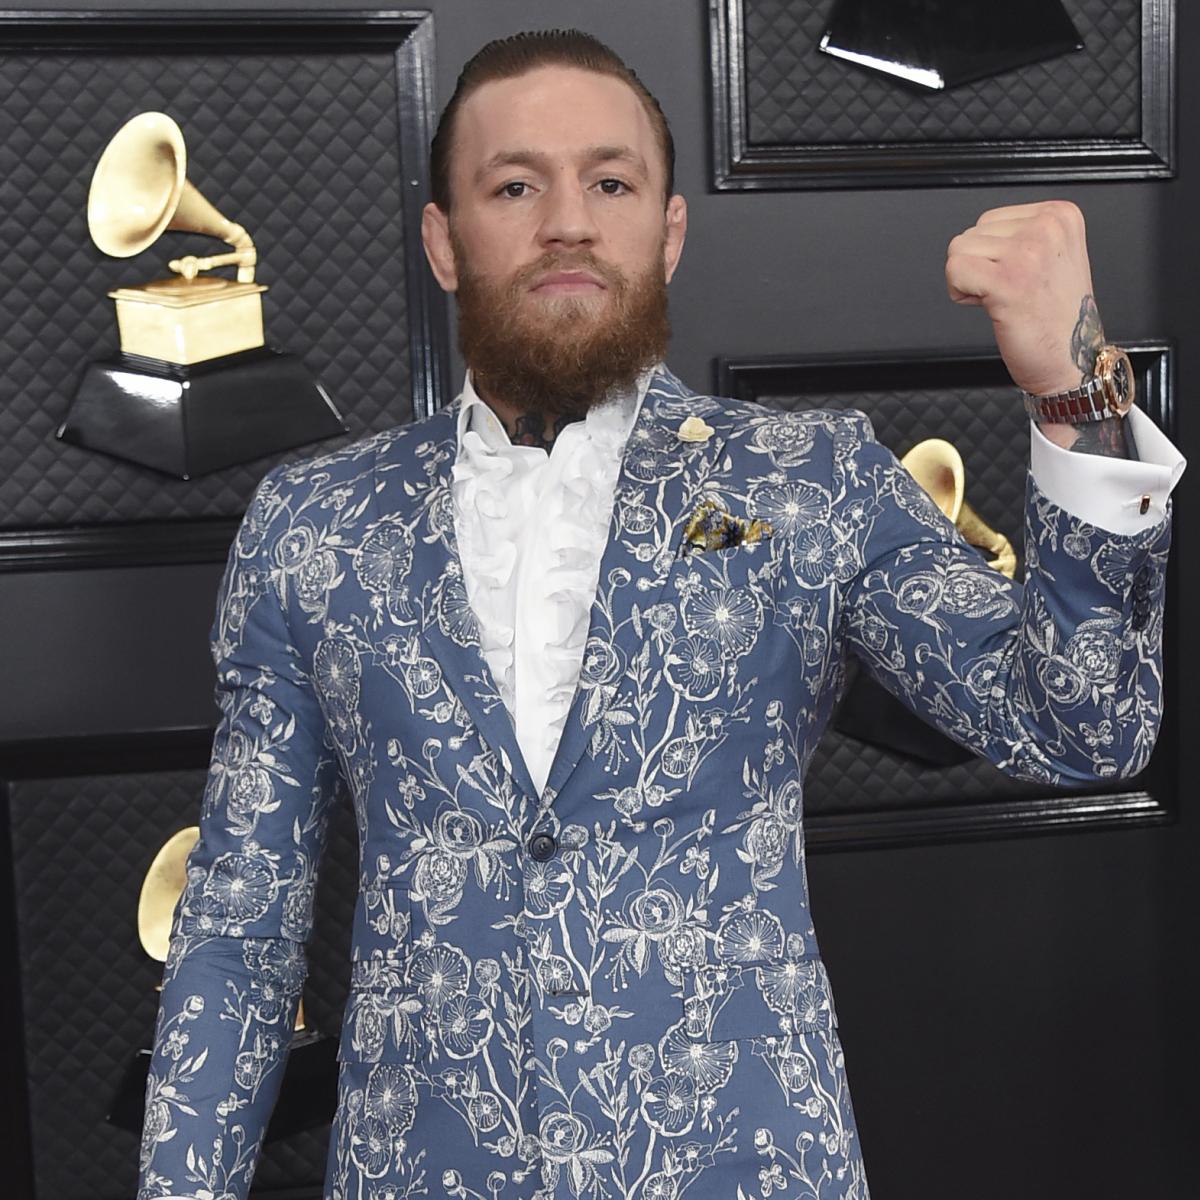 Conor McGregor’s Correct No. Twelve Whiskey Sold to Proximo Spirits in $600M Deal